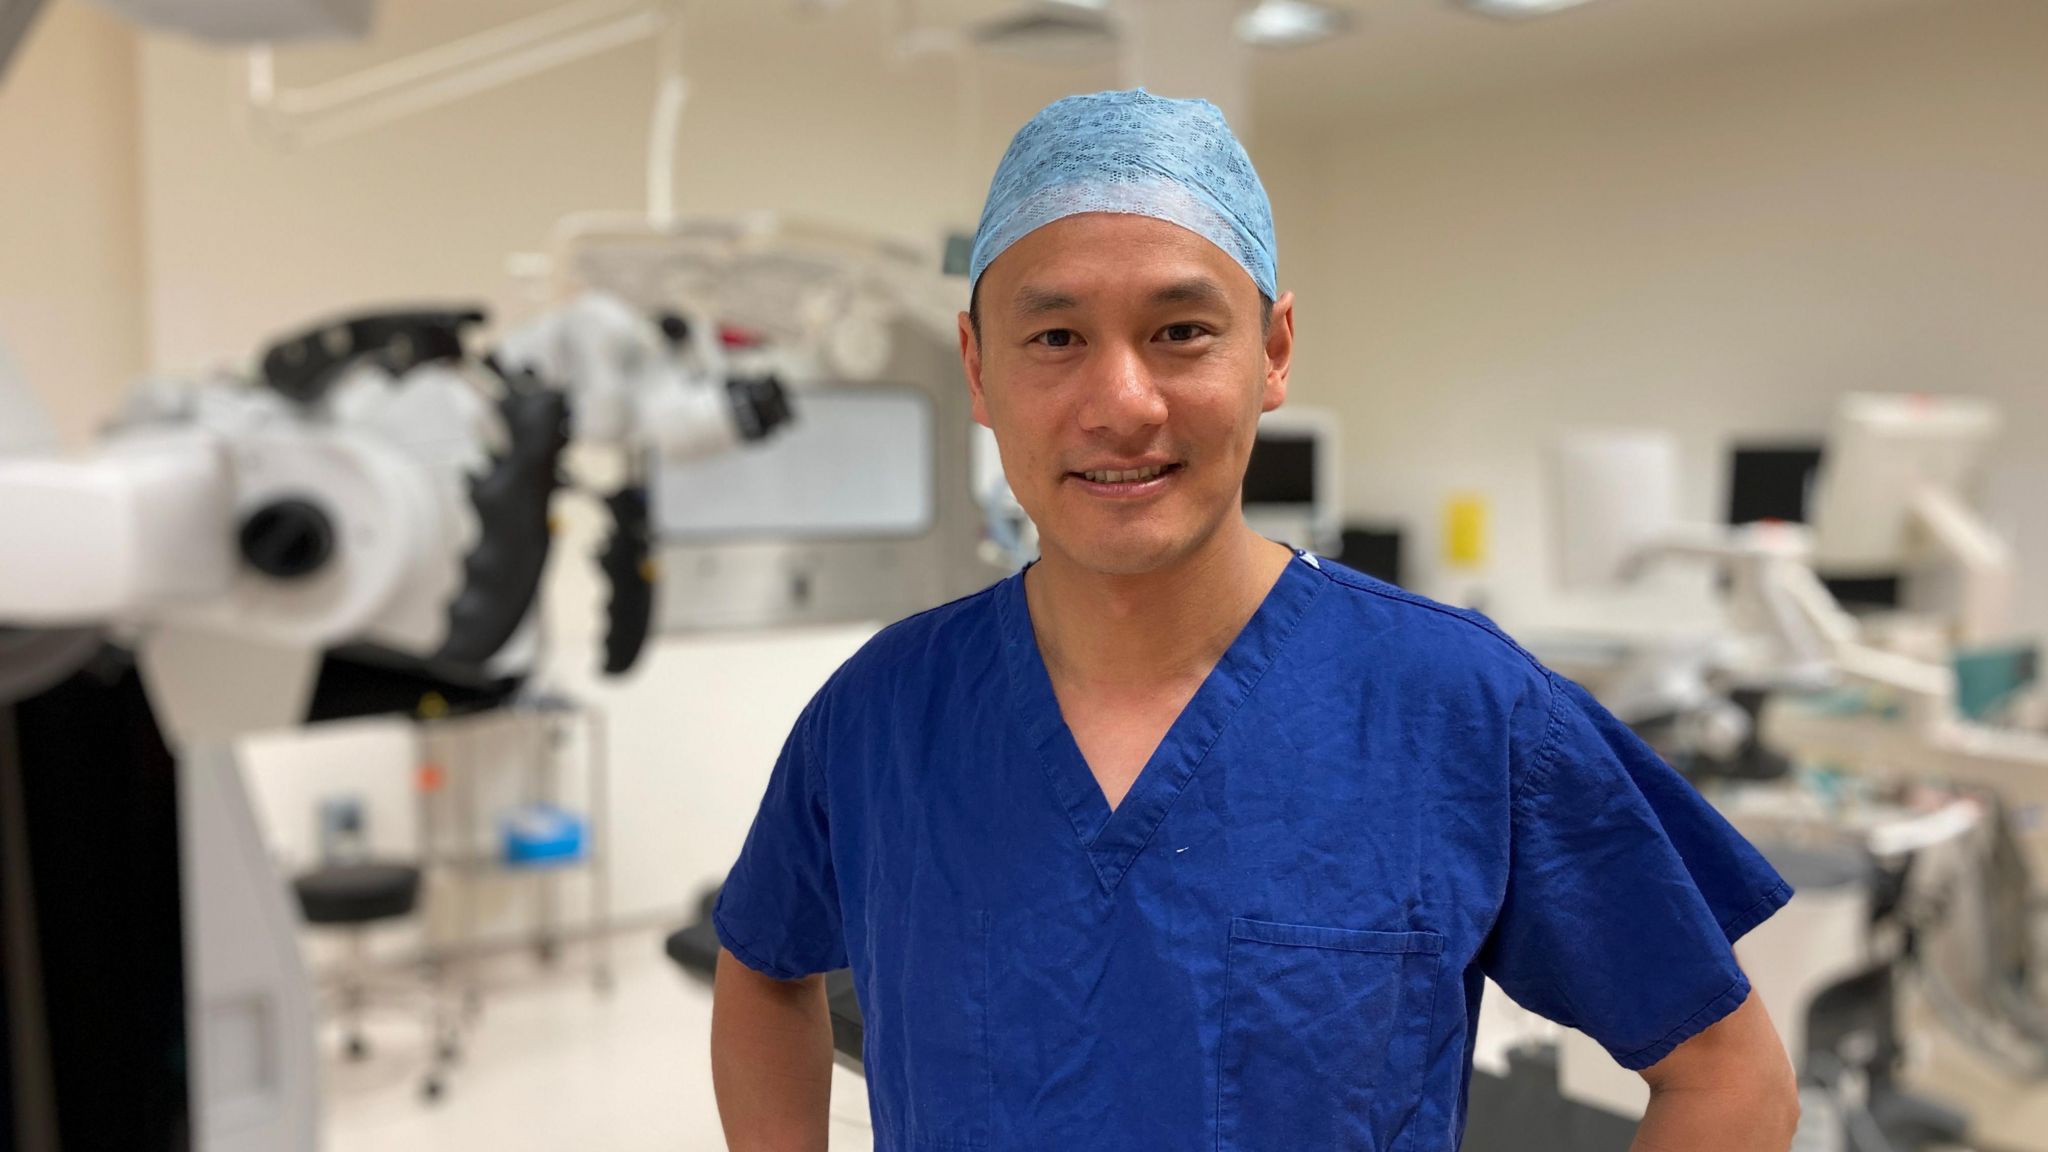 James Chan wearing scrubs in an operating theatre